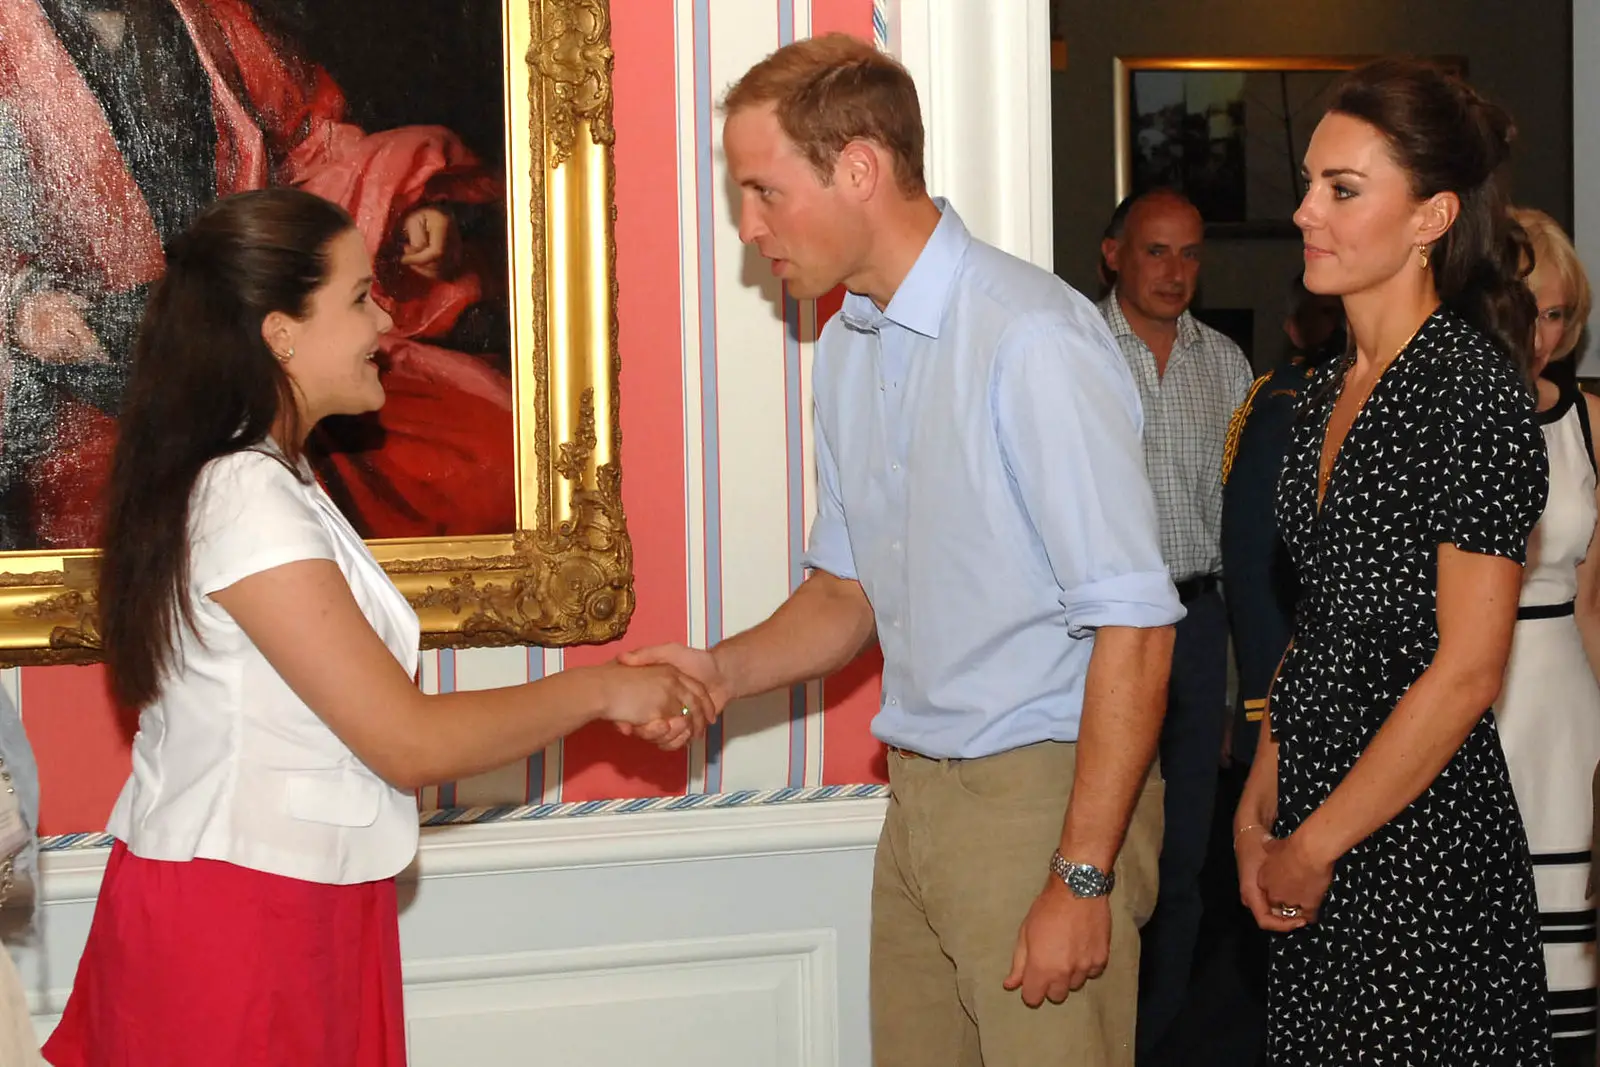 The Duke and Duchess of cambridge attended a Youth Reception during Canada visit in 2011